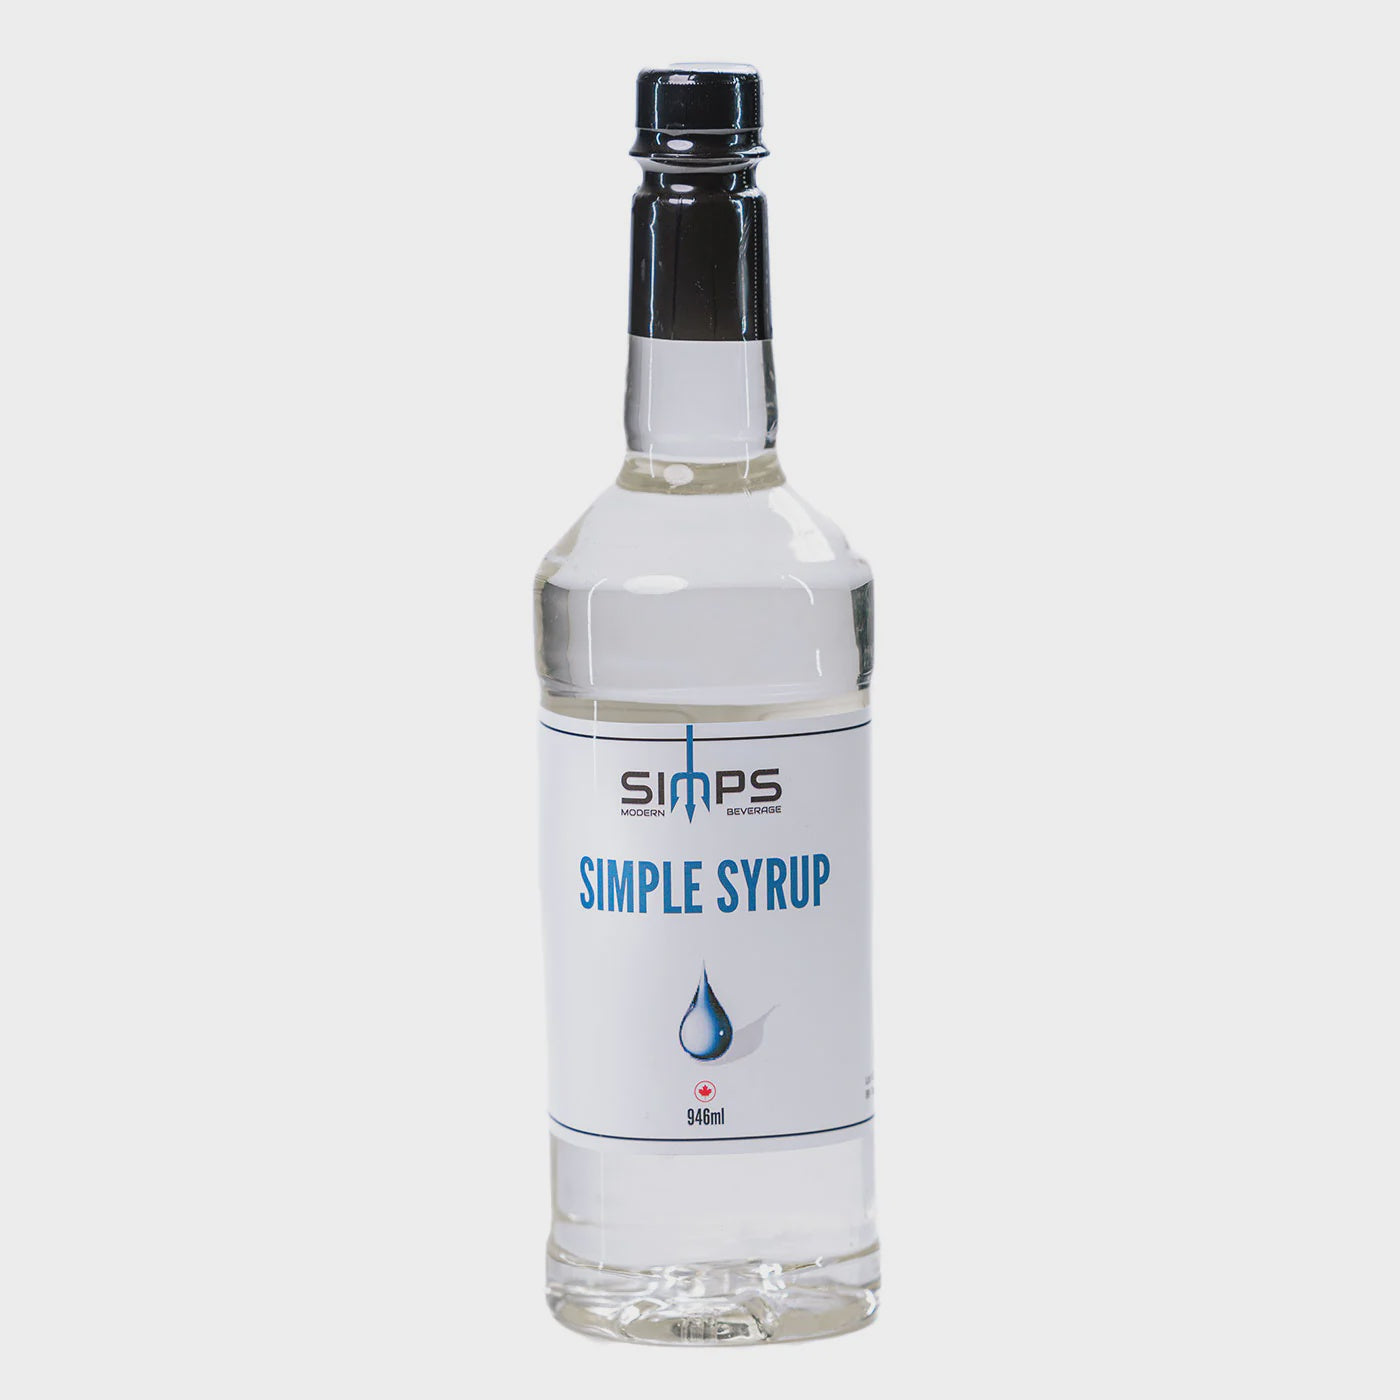 Simps Simple Syrup, 946ml